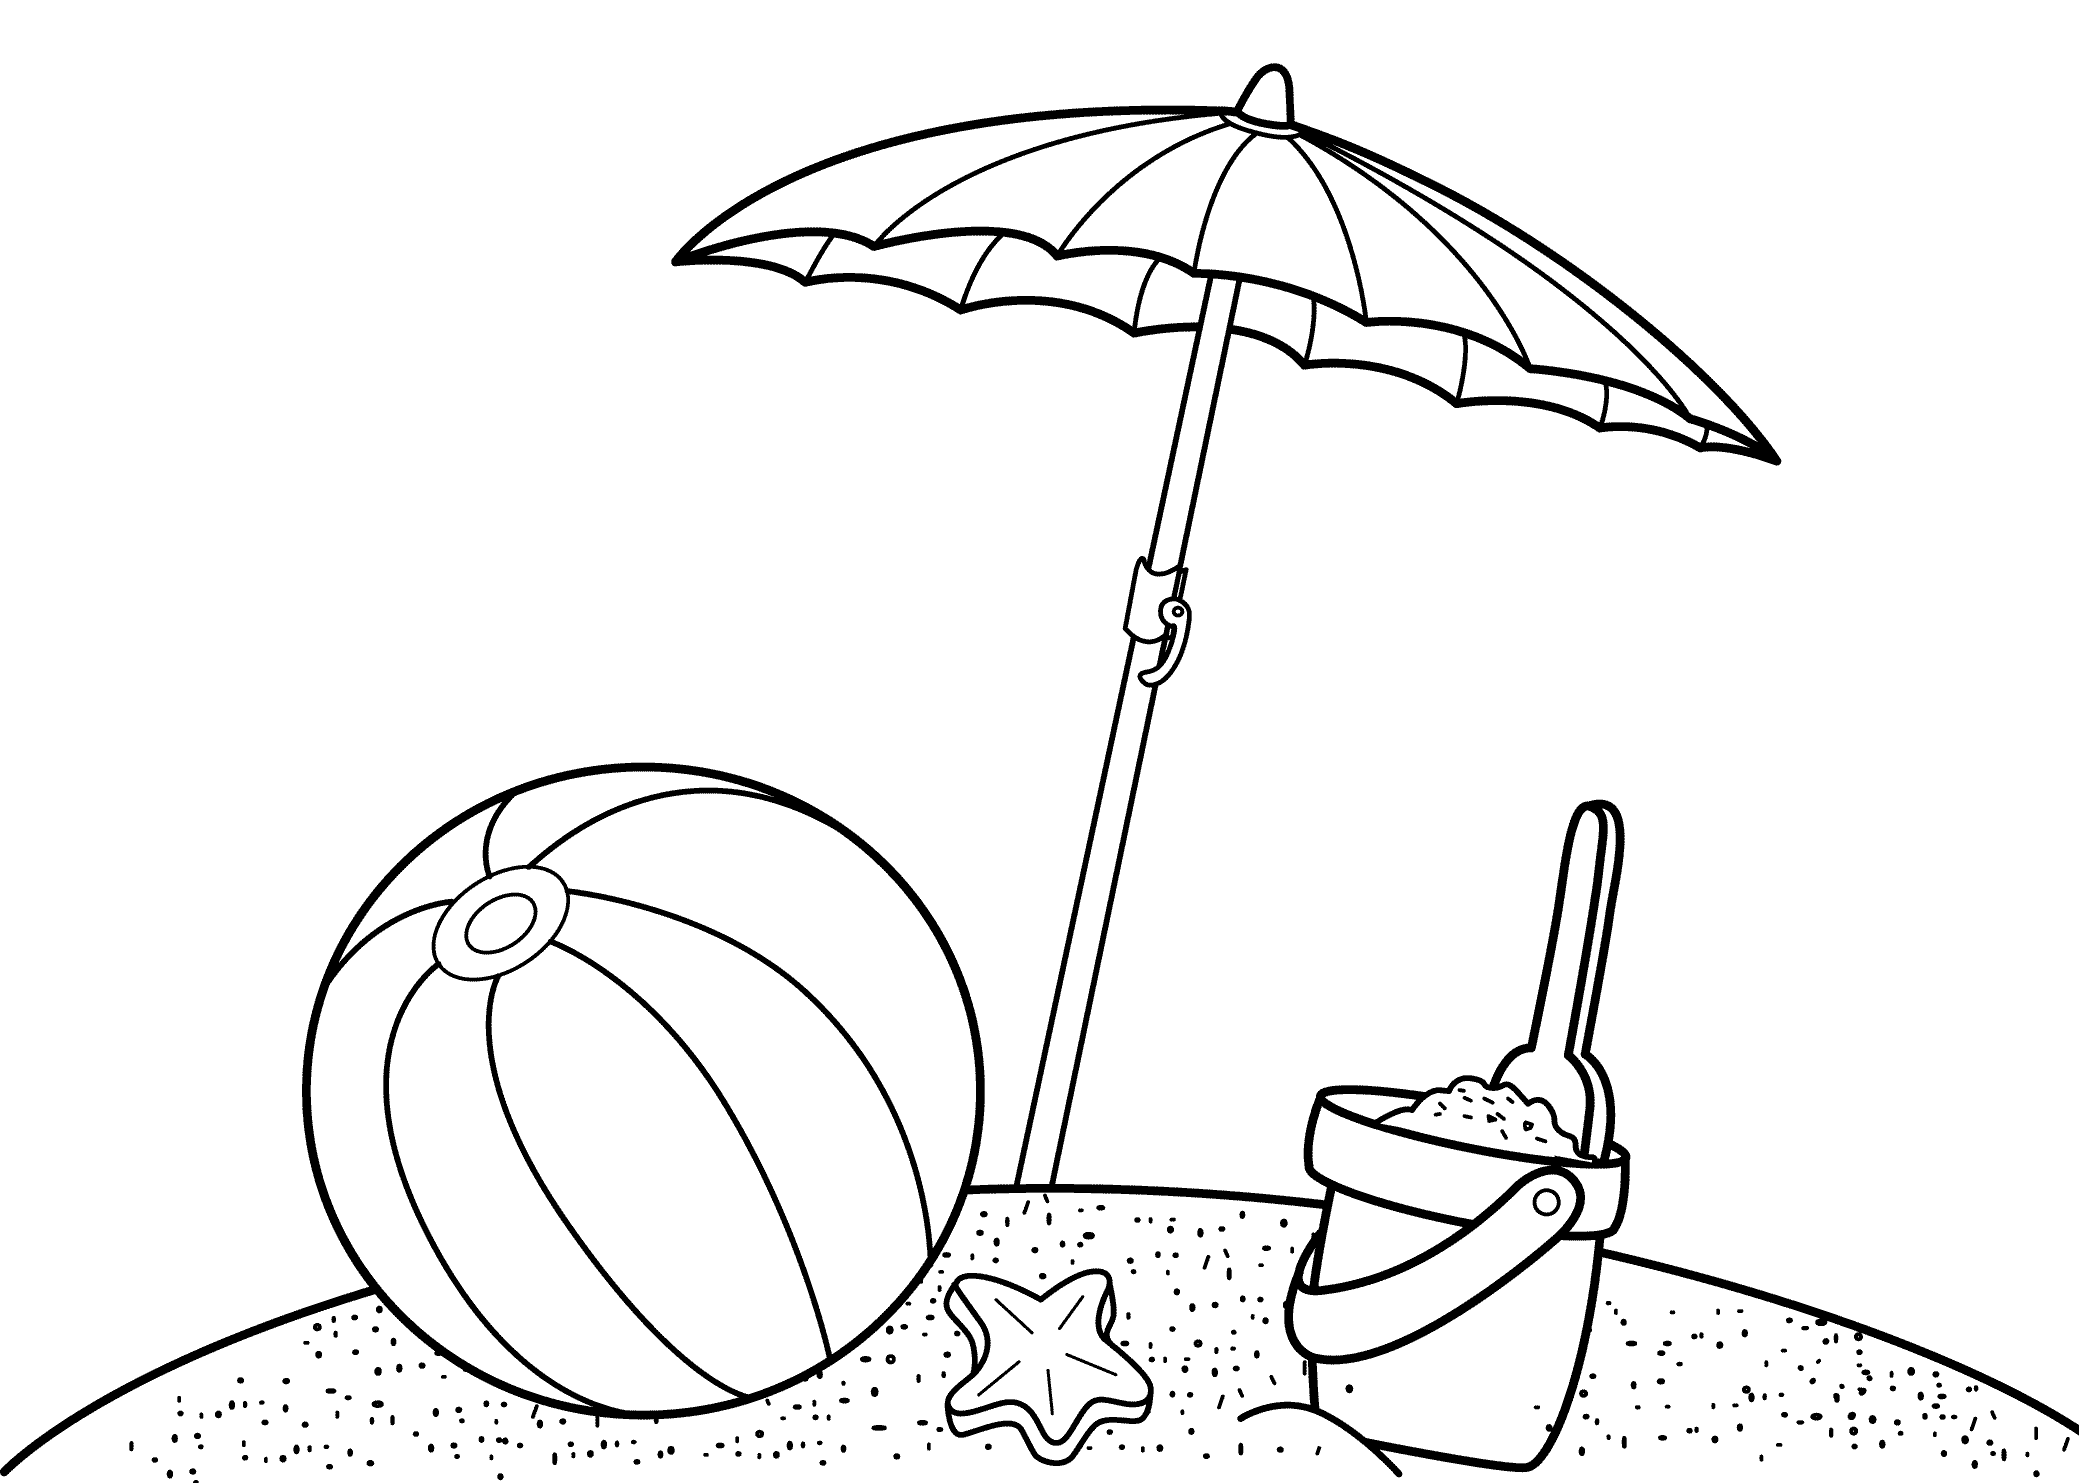 Download Free Printable Summer Coloring Pages for Kids!